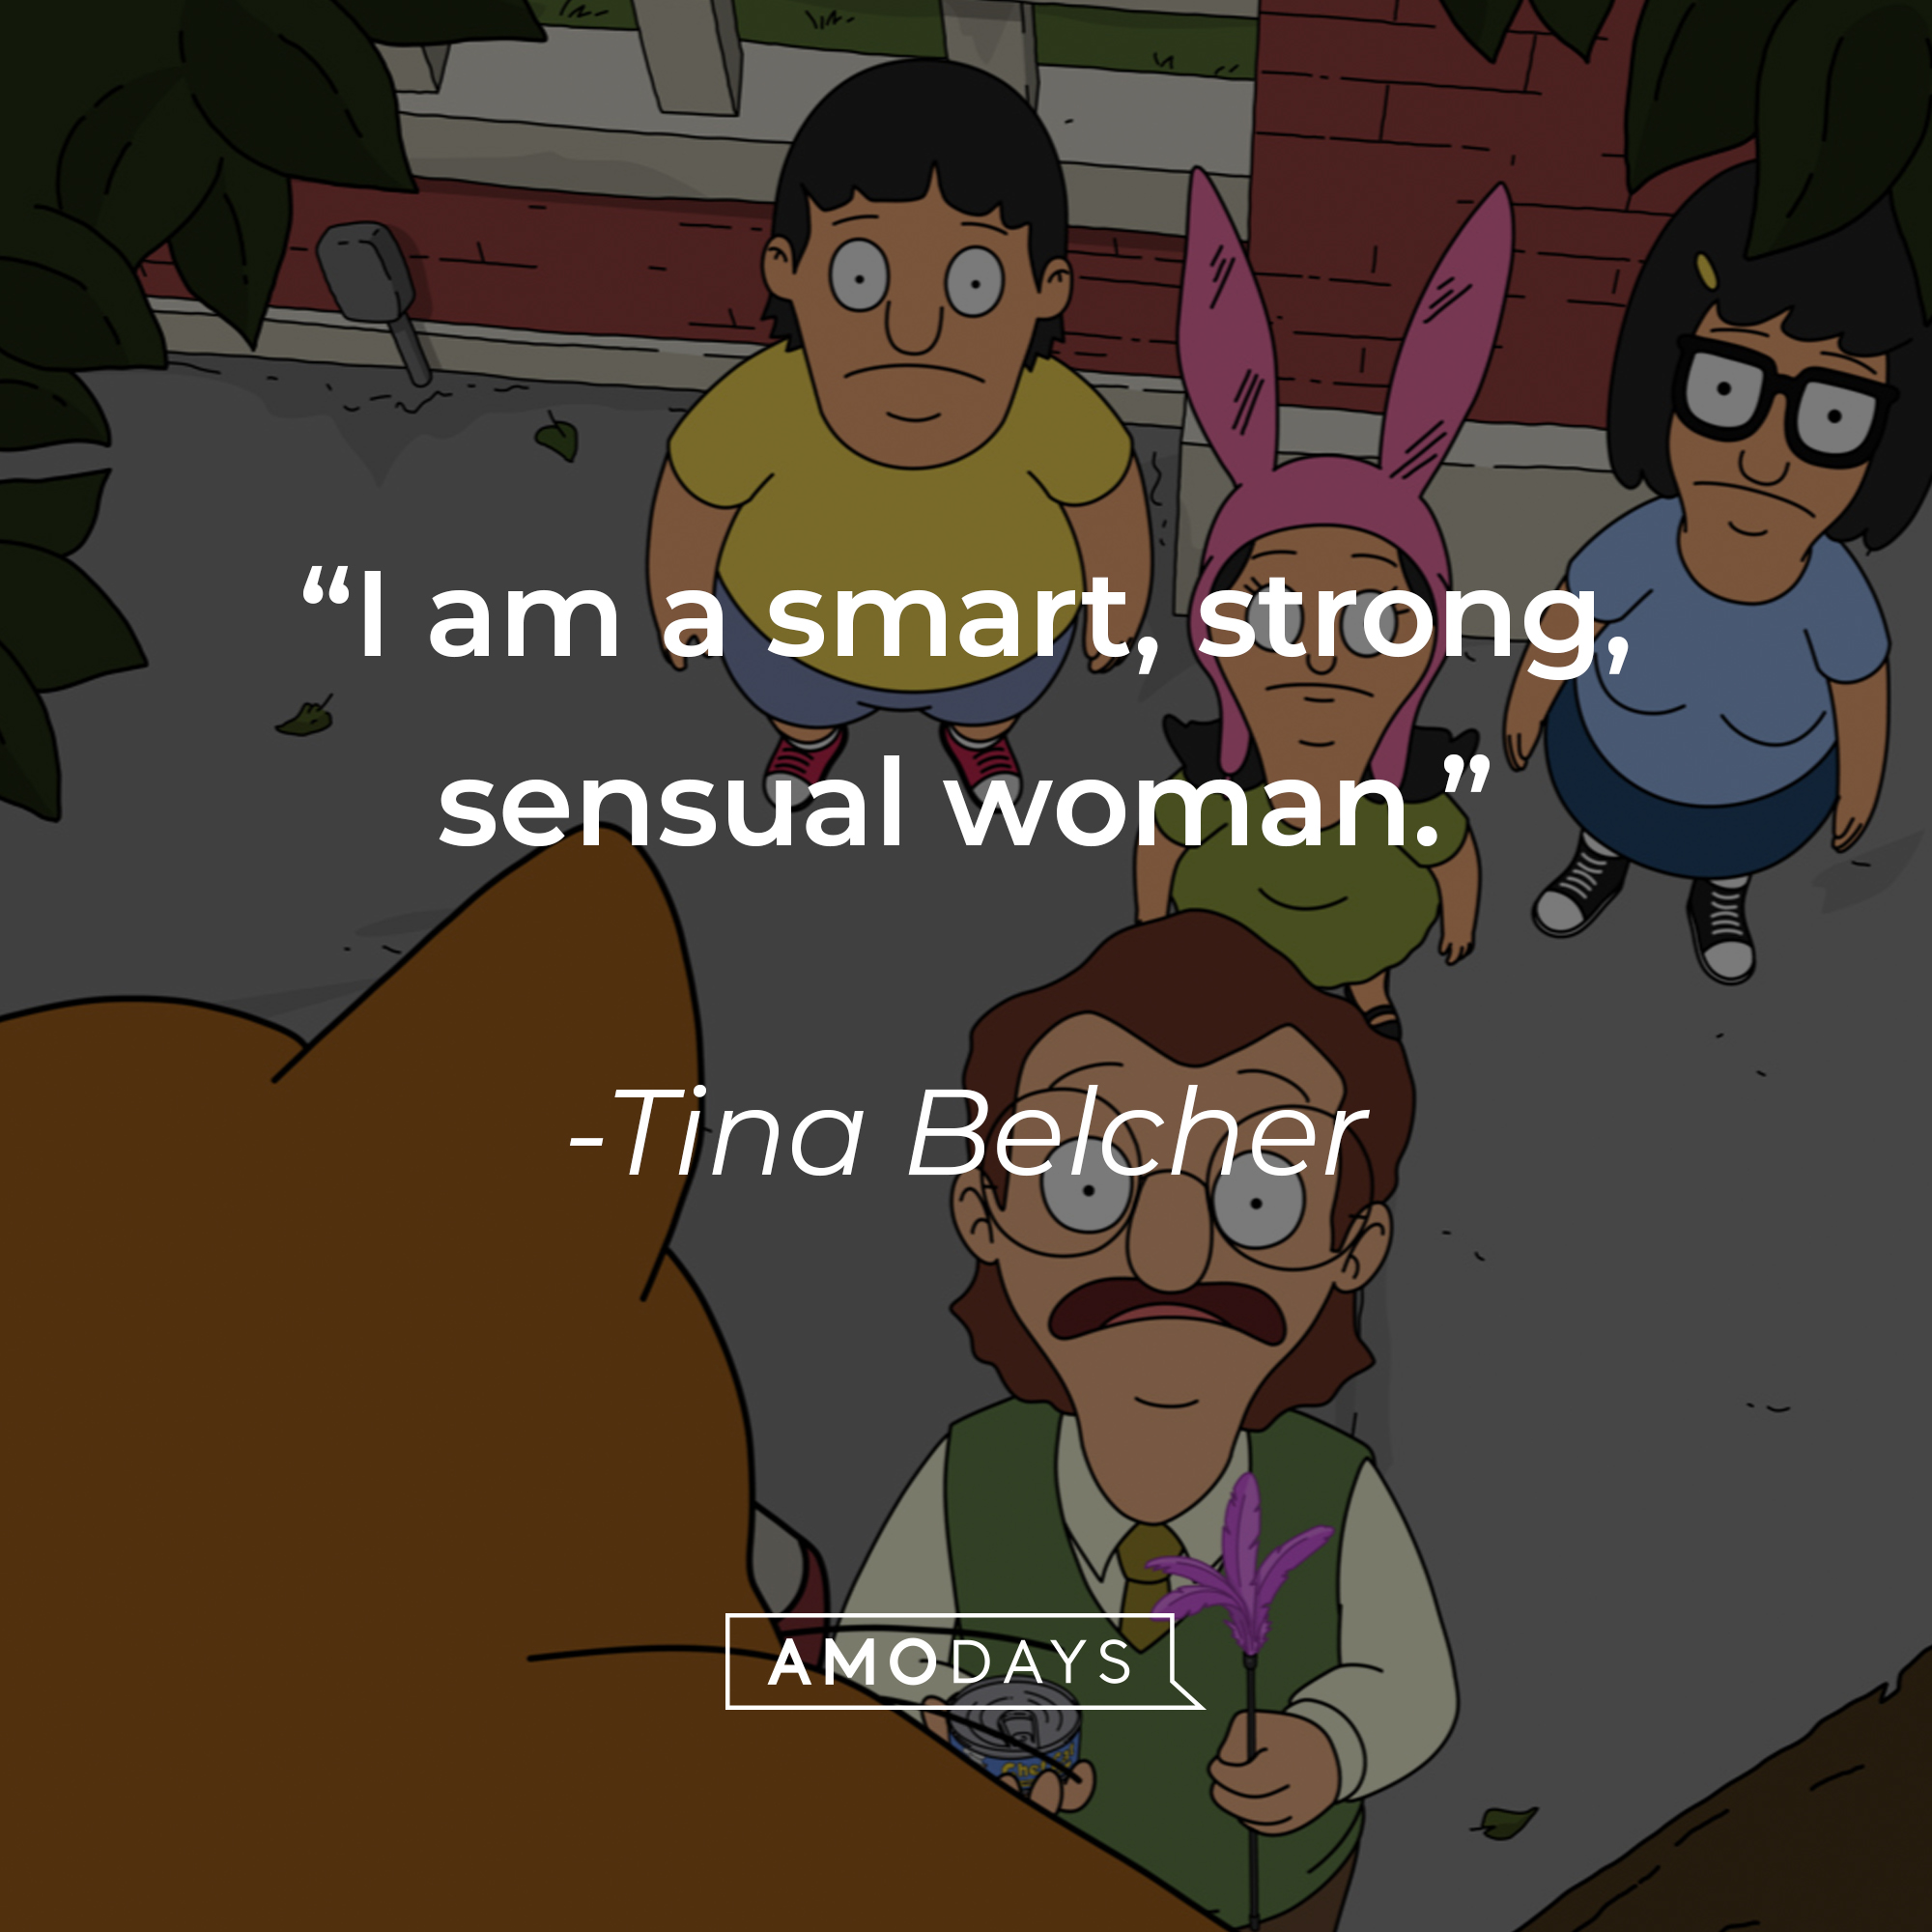 An Image of Tina Belcher and other characters from “Bob’s Burgers” with her quote: “I am a smart, strong, sensual woman.” | Source: Facebook.com/BobsBurgers